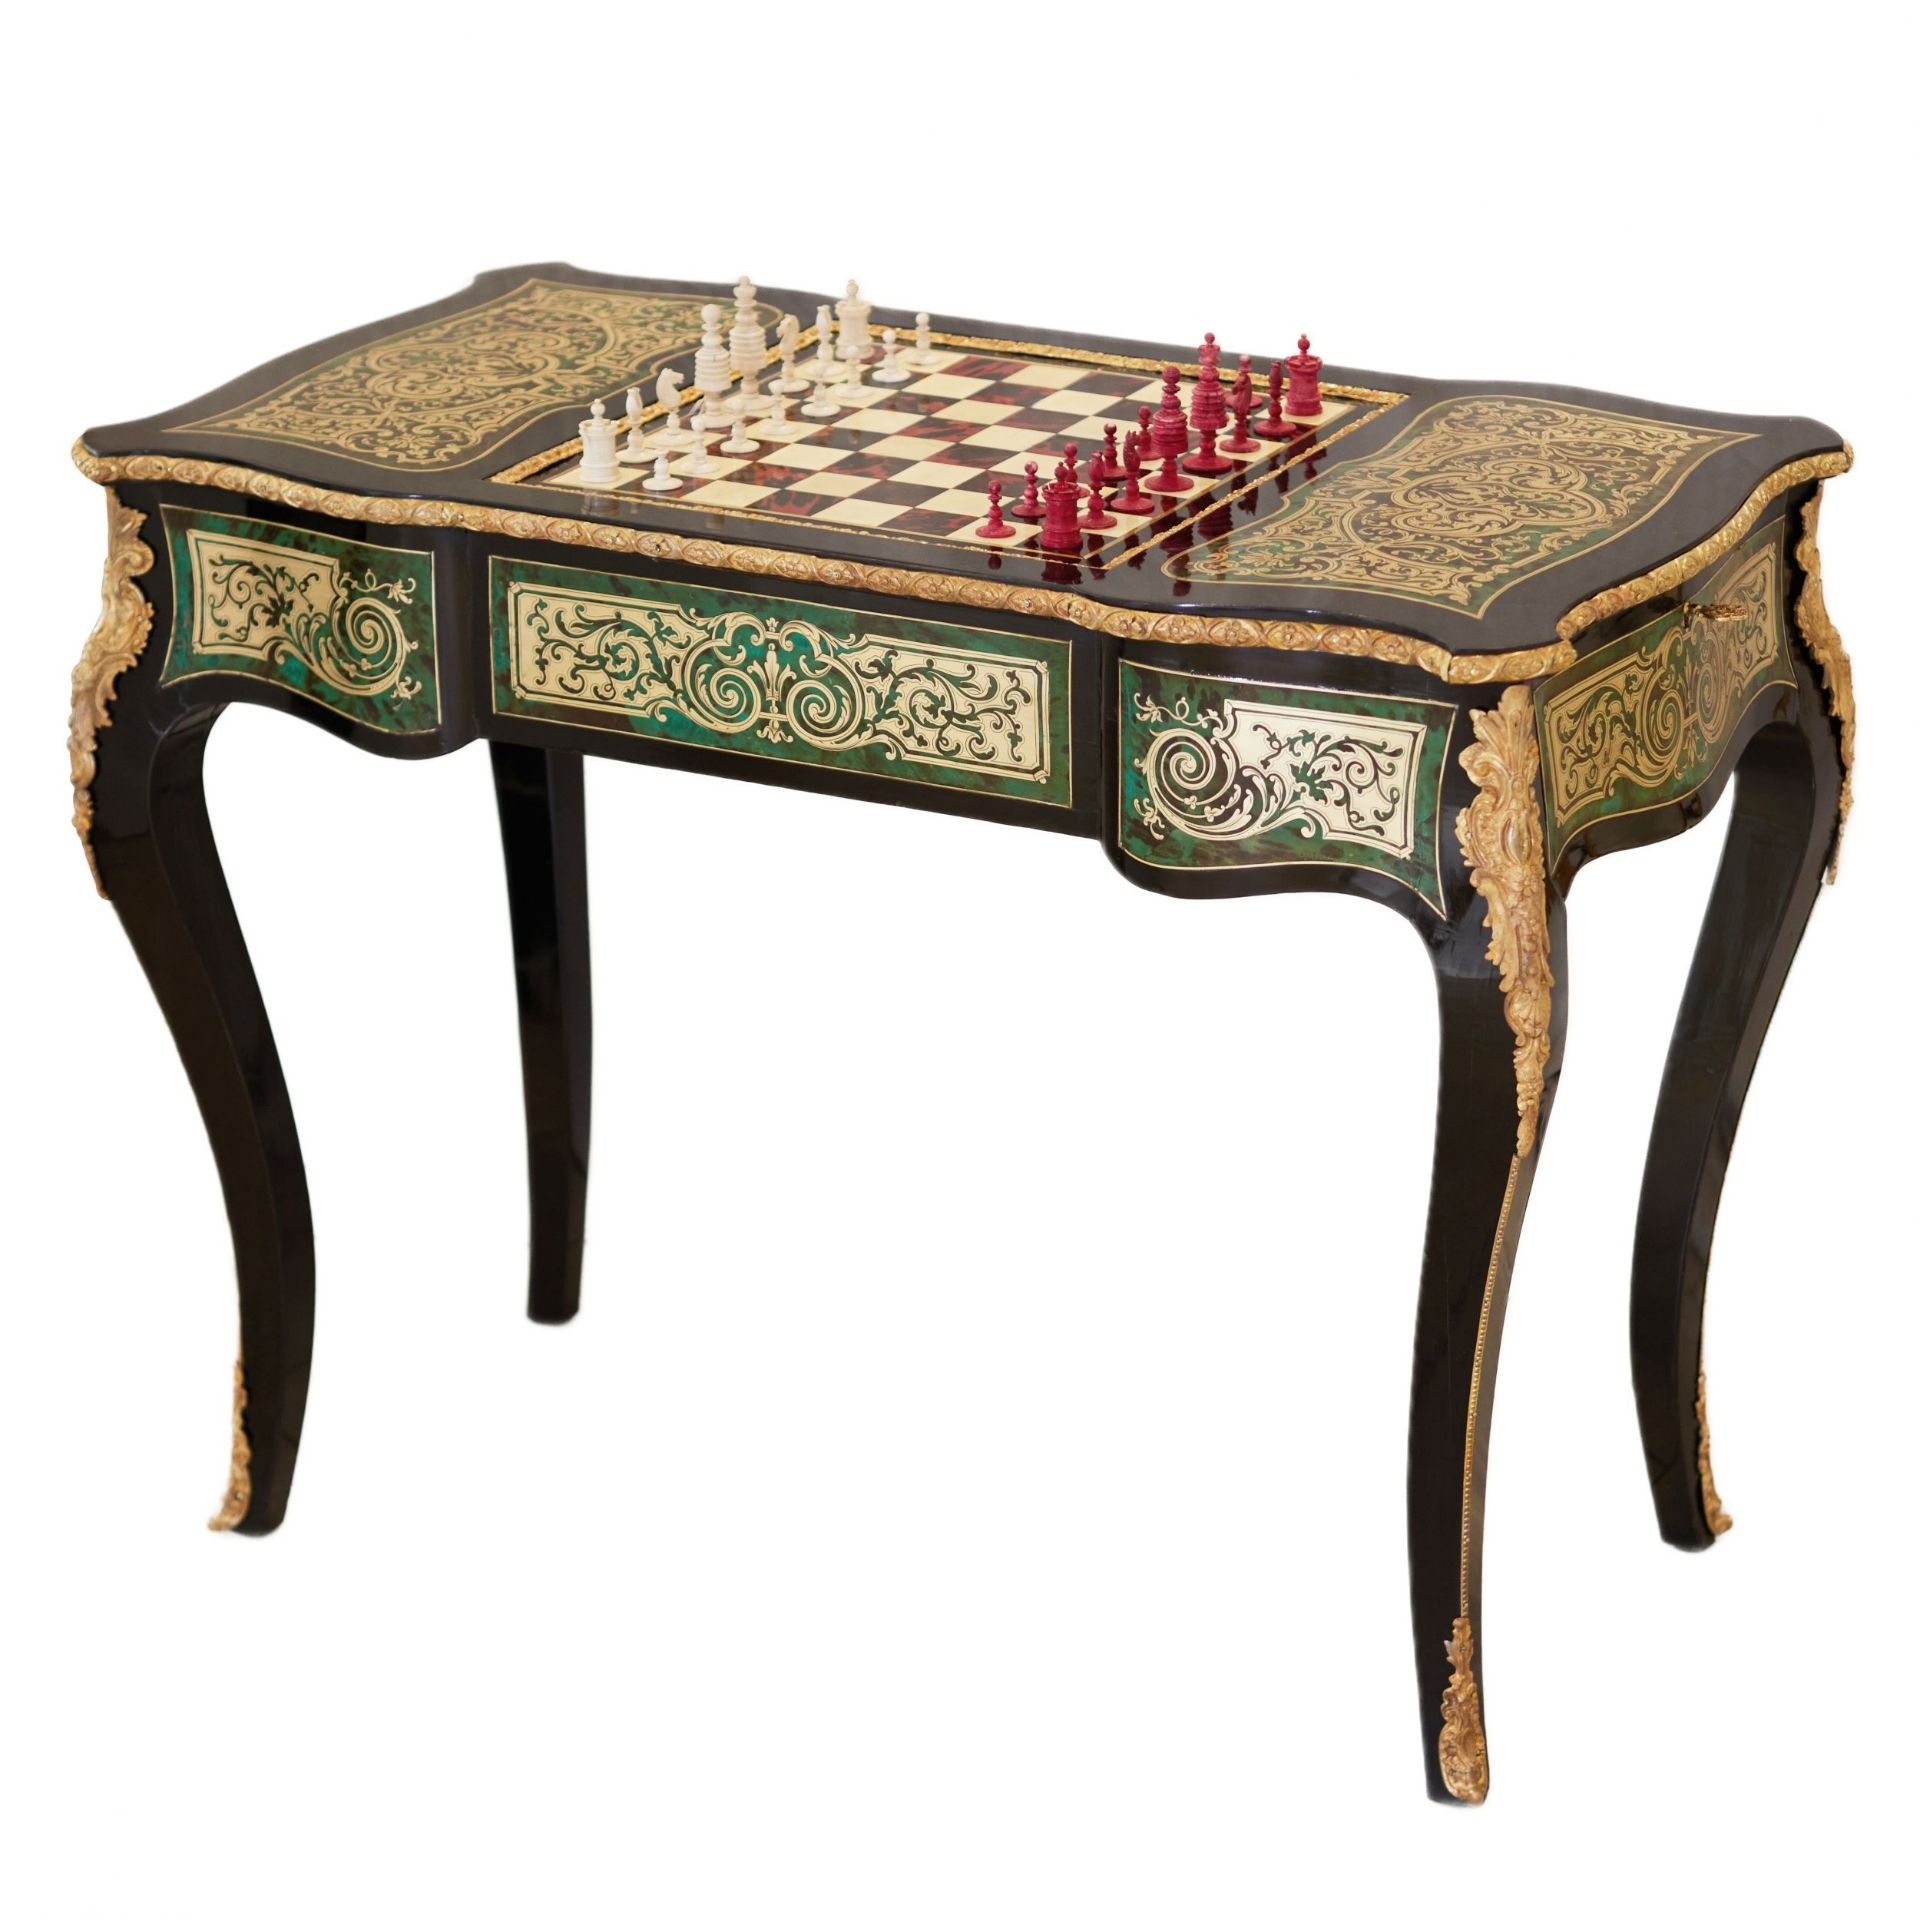 Game chess table in Boulle style. France. Turn of the 19th-20th century. - Image 2 of 11